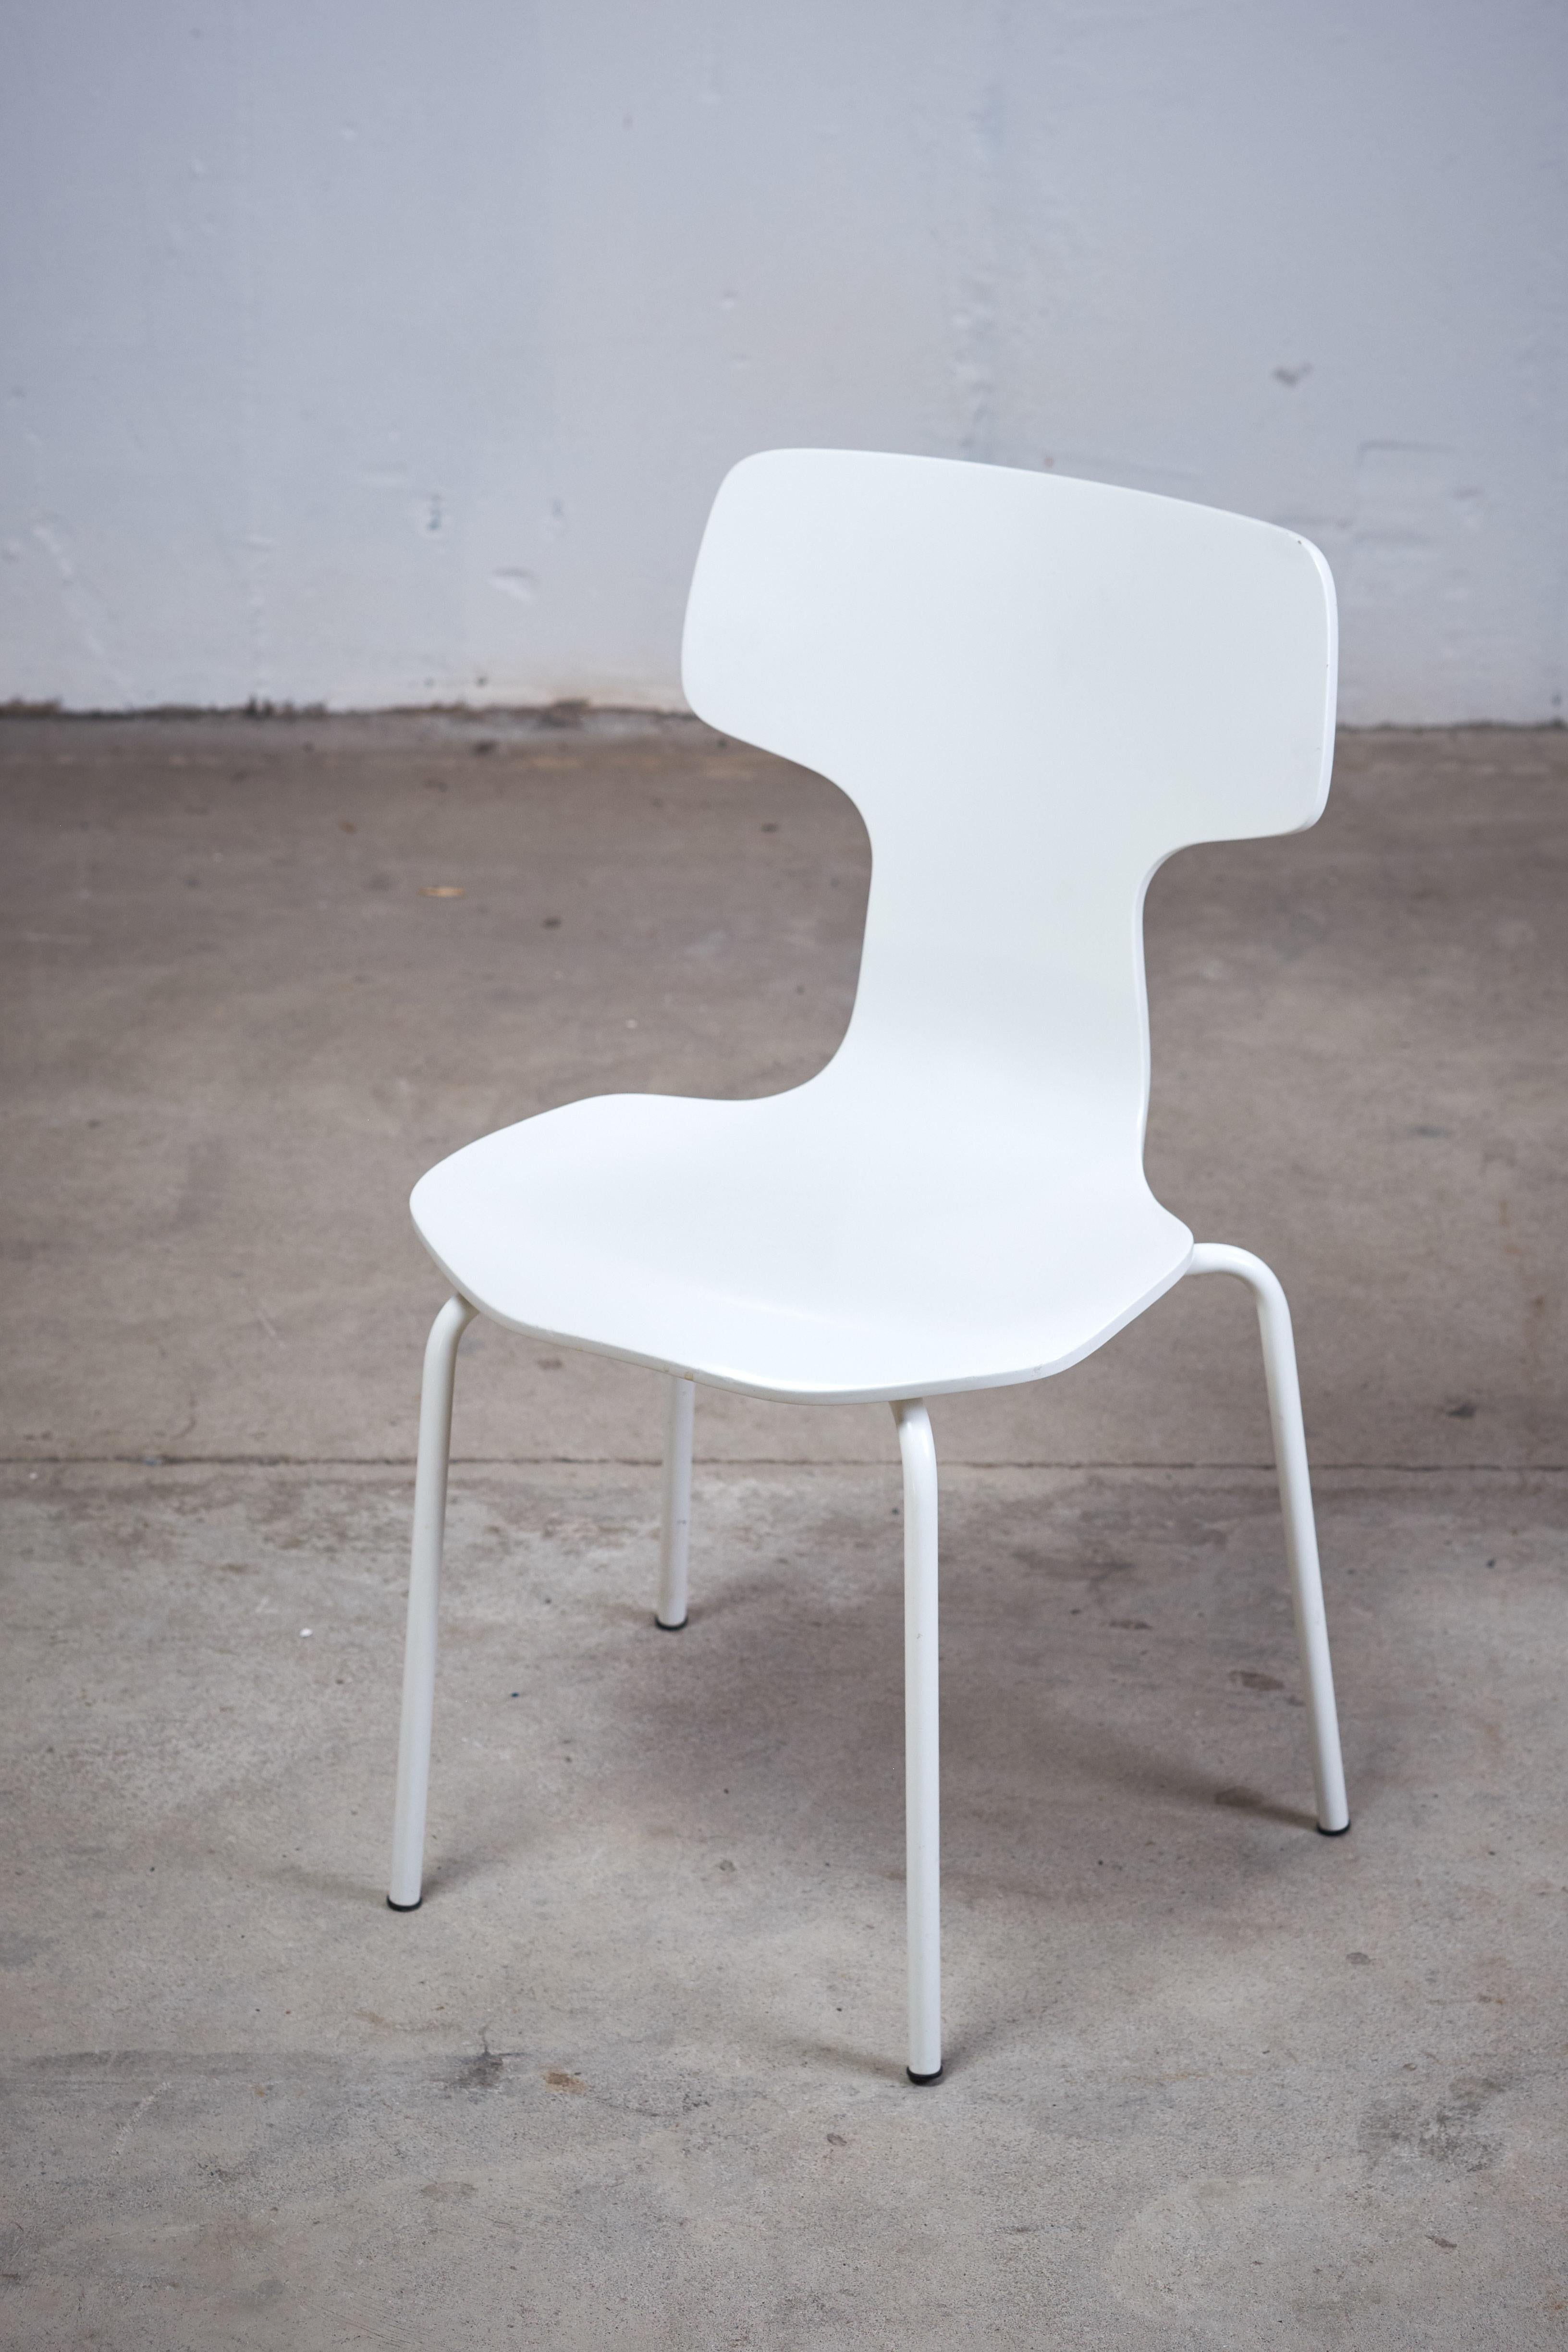 Seldom seen chair of bent white lacquered teak plywood chairs from the 1960s. The children's model of the 'Hammer/T-chair' by Arne Jacobsen for Fritz Hansen.
The chair are in very good original condition. Model #3103. Collector’s piece.